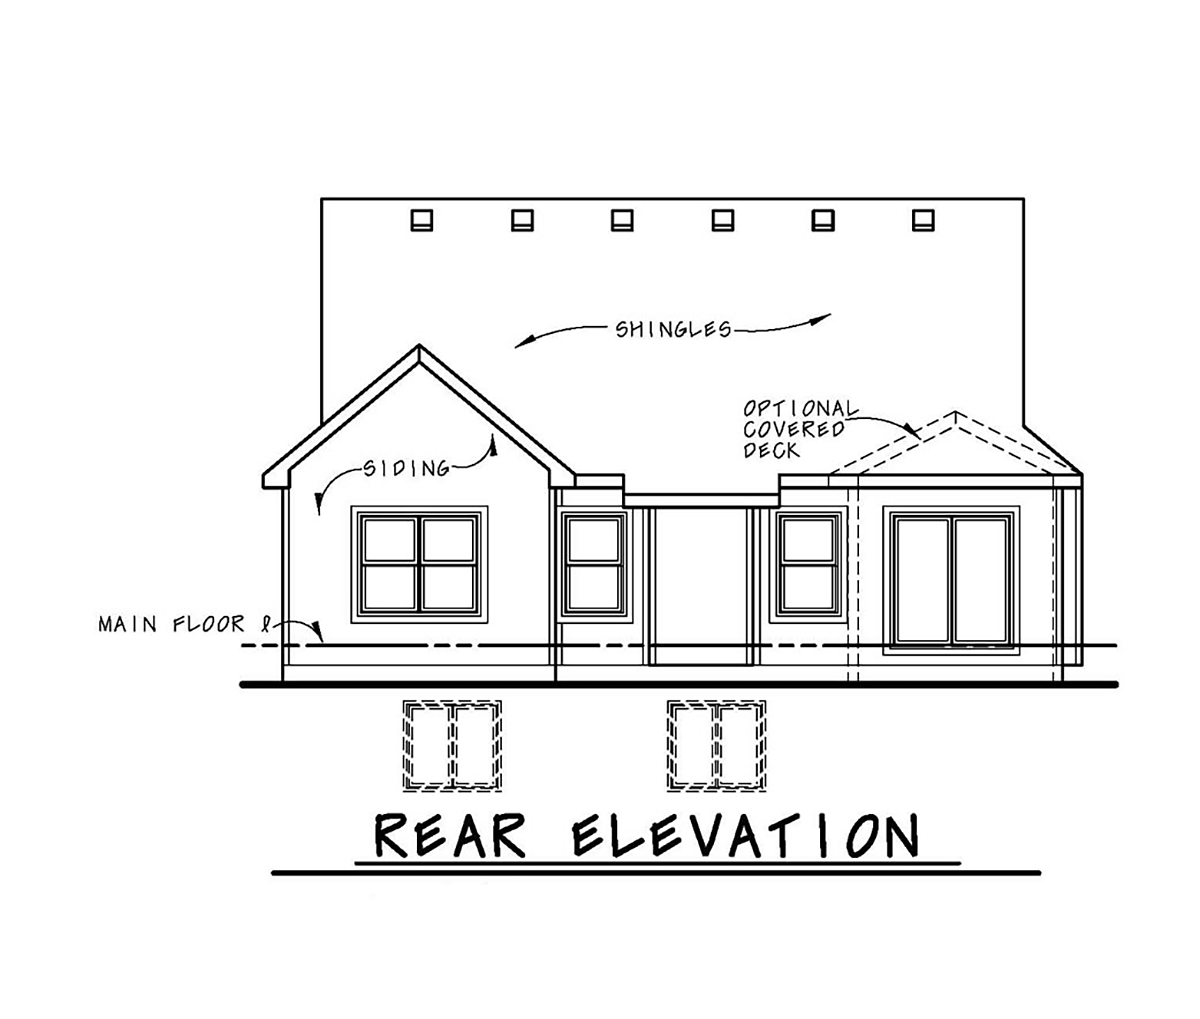 Cottage, Country, Craftsman Plan with 1898 Sq. Ft., 3 Bedrooms, 3 Bathrooms, 2 Car Garage Rear Elevation